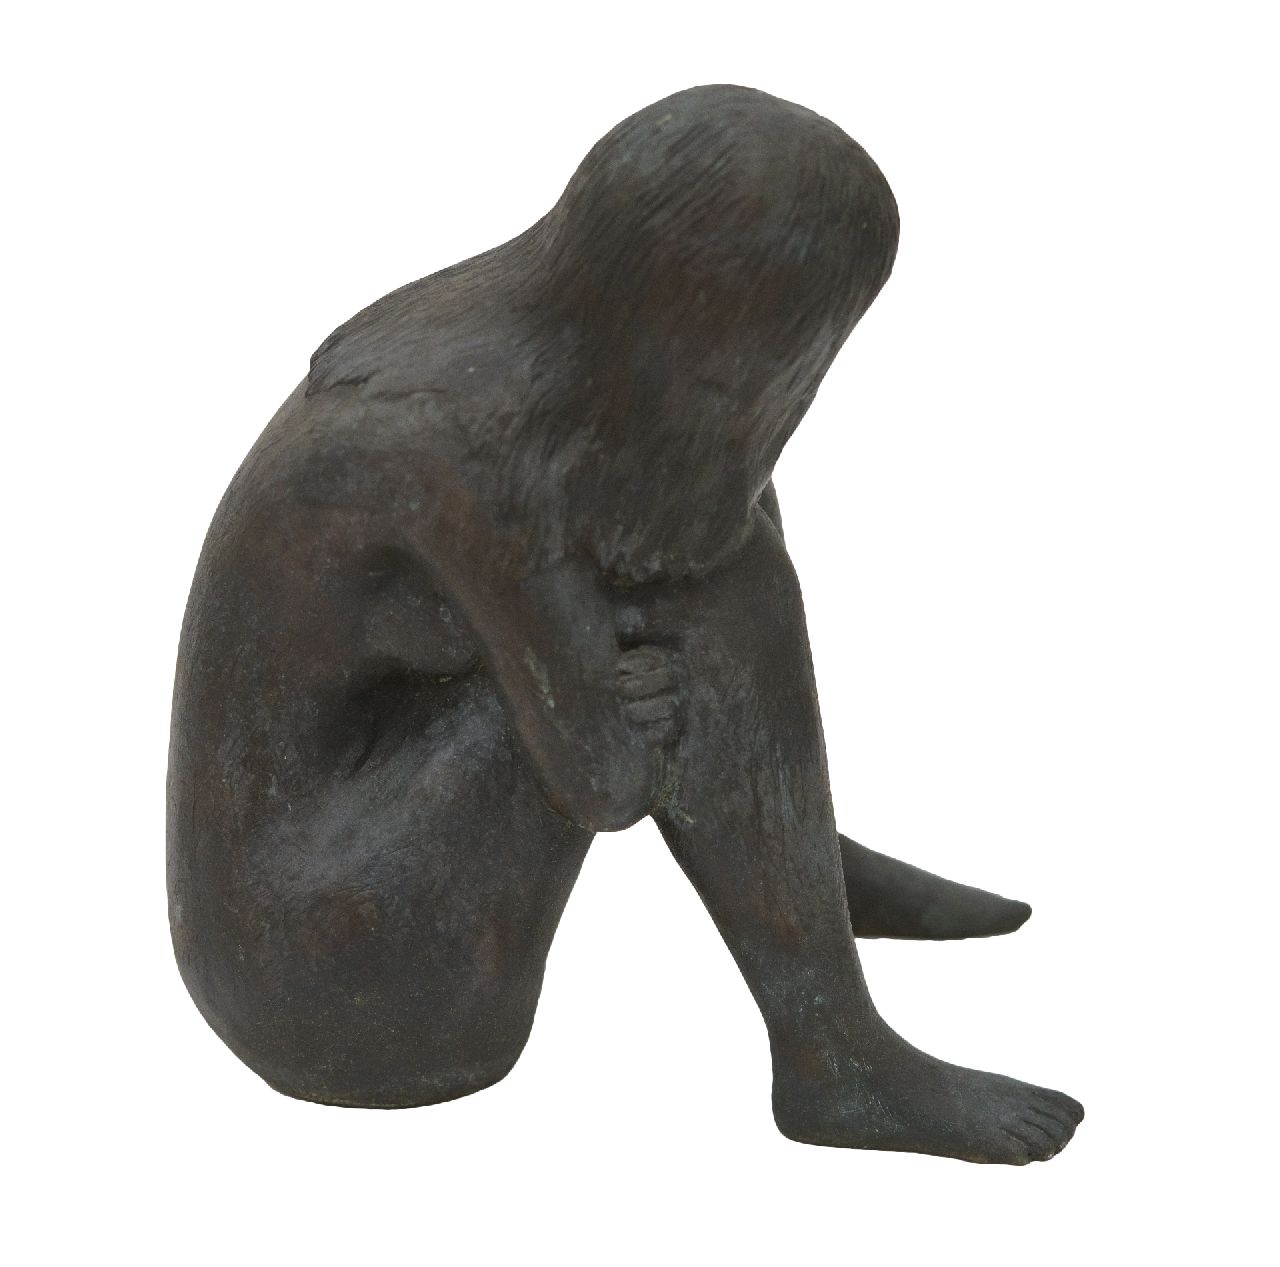 Moser K.  | Kurt Moser | Sculptures and objects offered for sale | Melancholie, bronze 31.7 x 19.4 cm, signed with monogram along lower edge